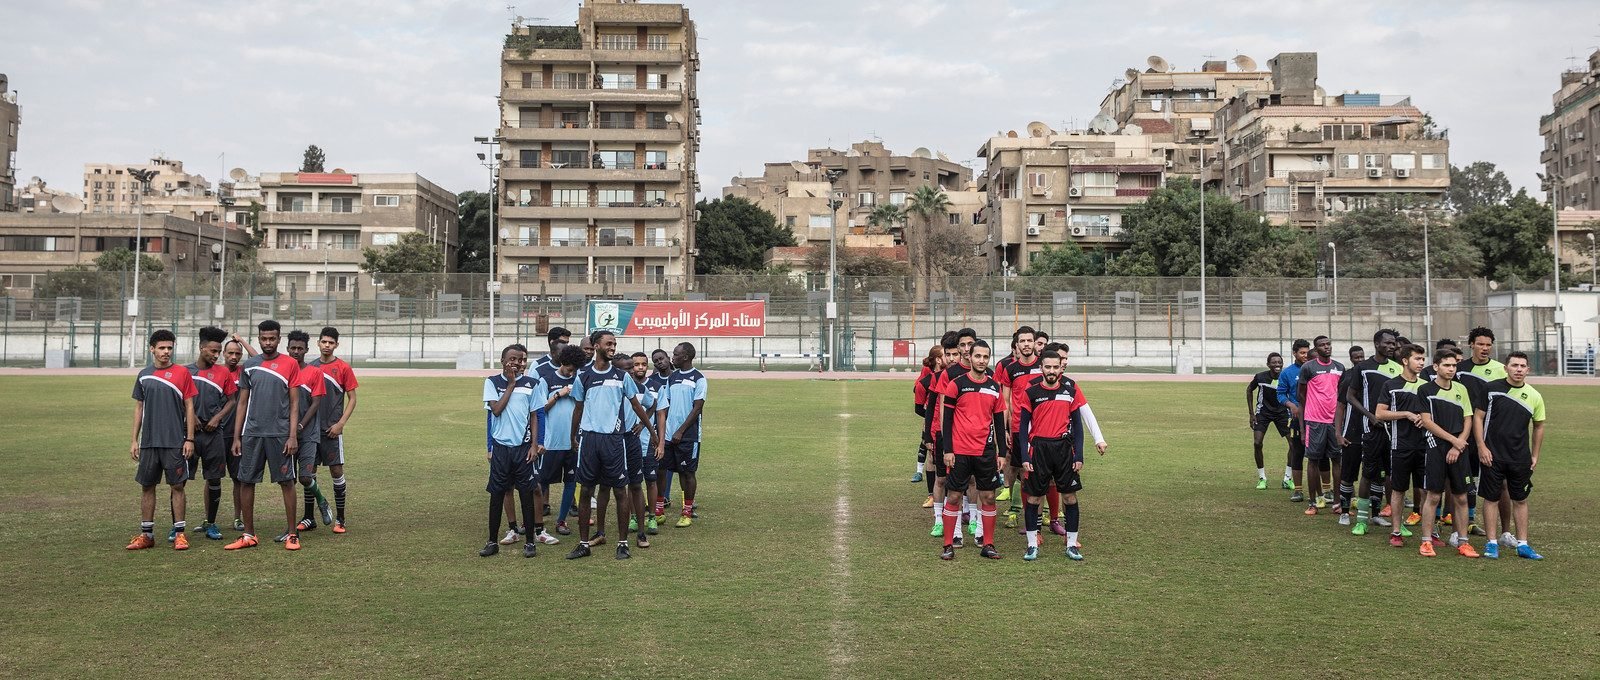 Football Tournament Brings Refugees and Host Community Together